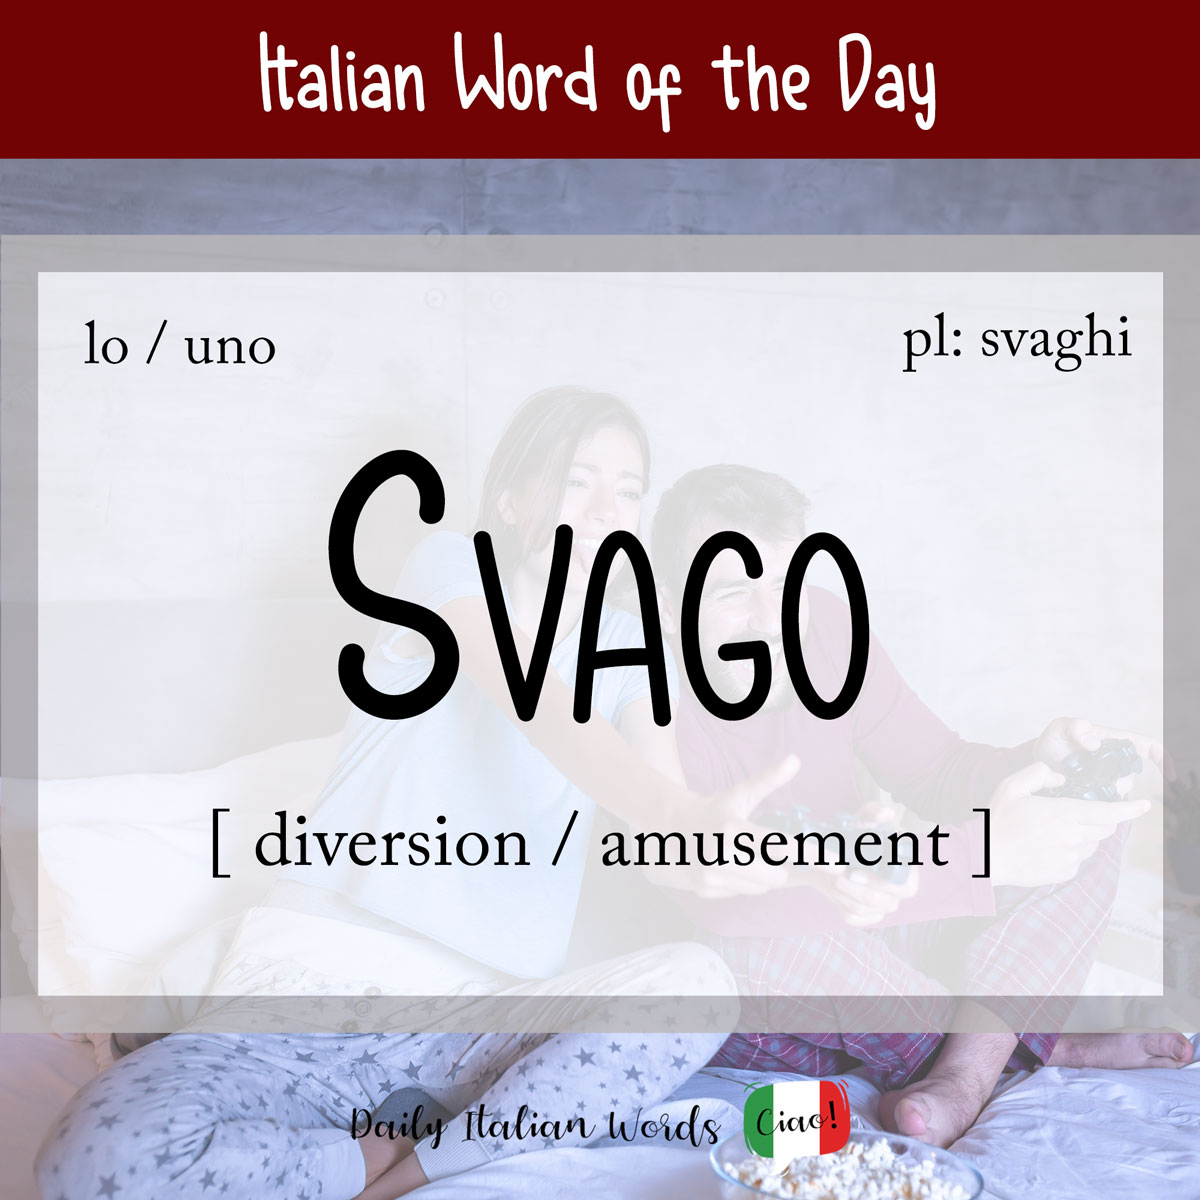 Italian word of the day: Svago (pastime/entertainment)